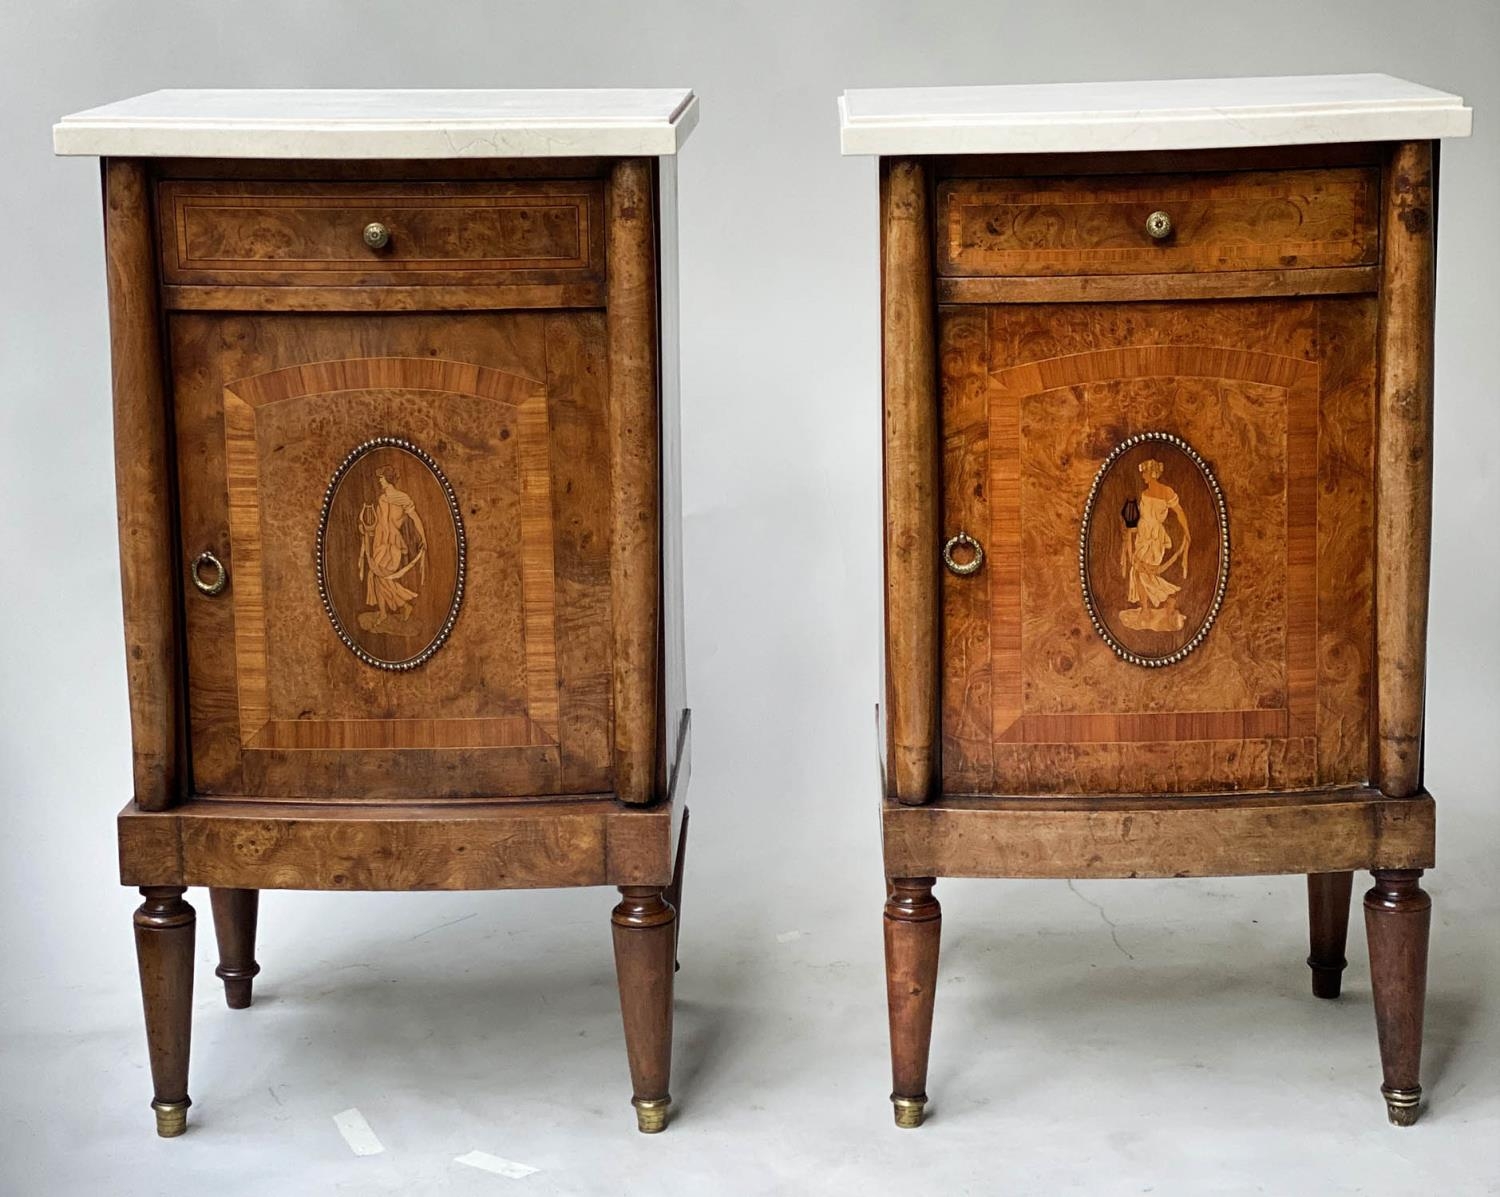 SIDE CABINETS, a pair, late 19th/early 20th century French burr walnut and gilt metal mounted,